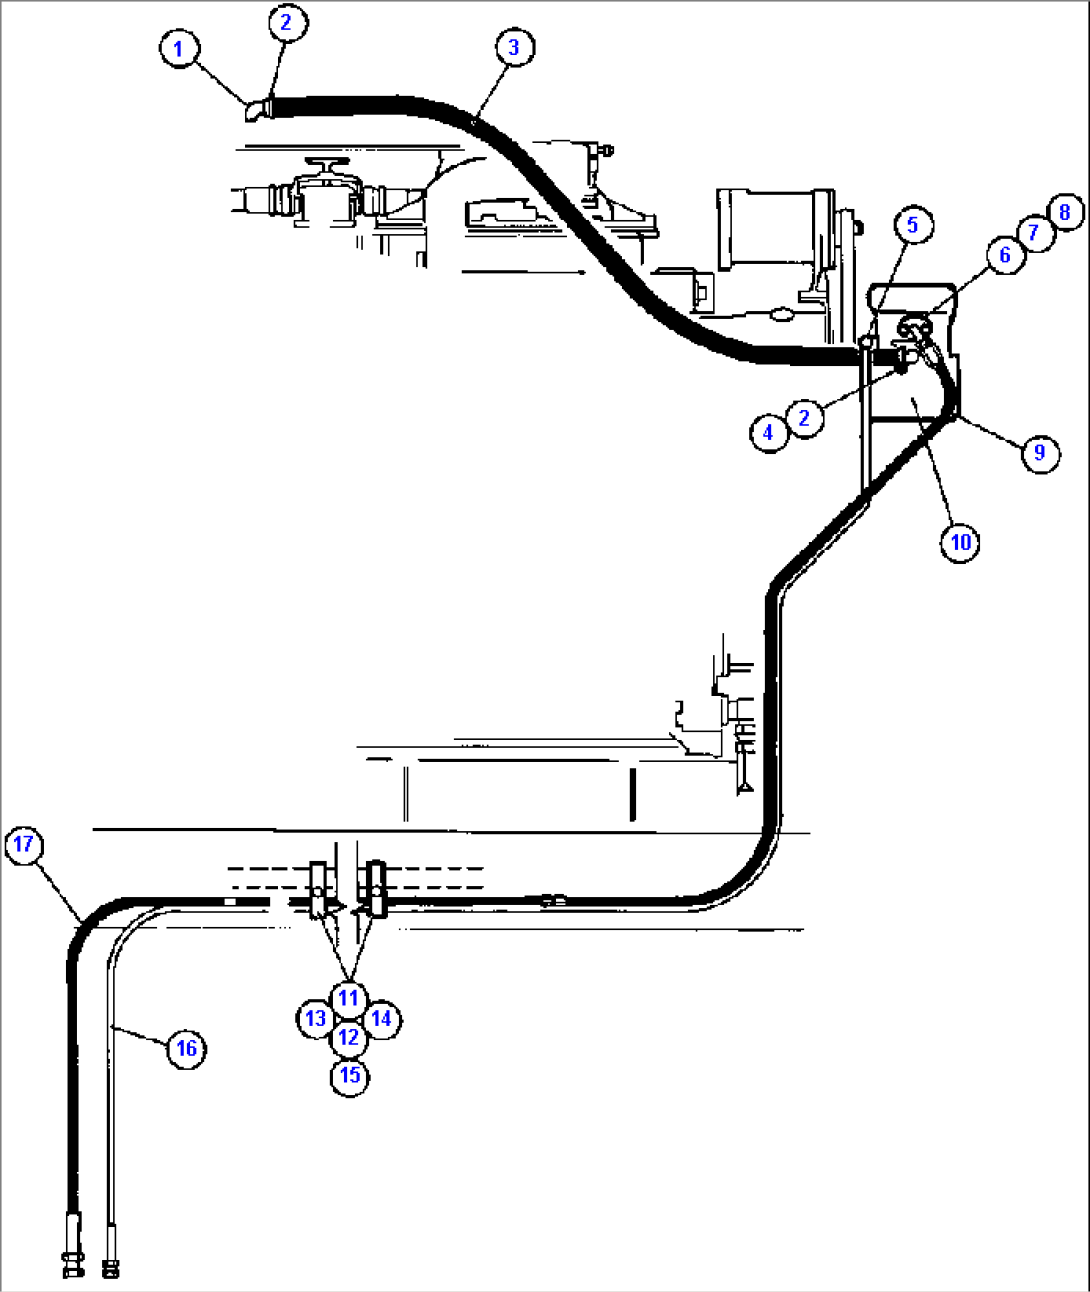 AIR COMPRESSOR PIPING